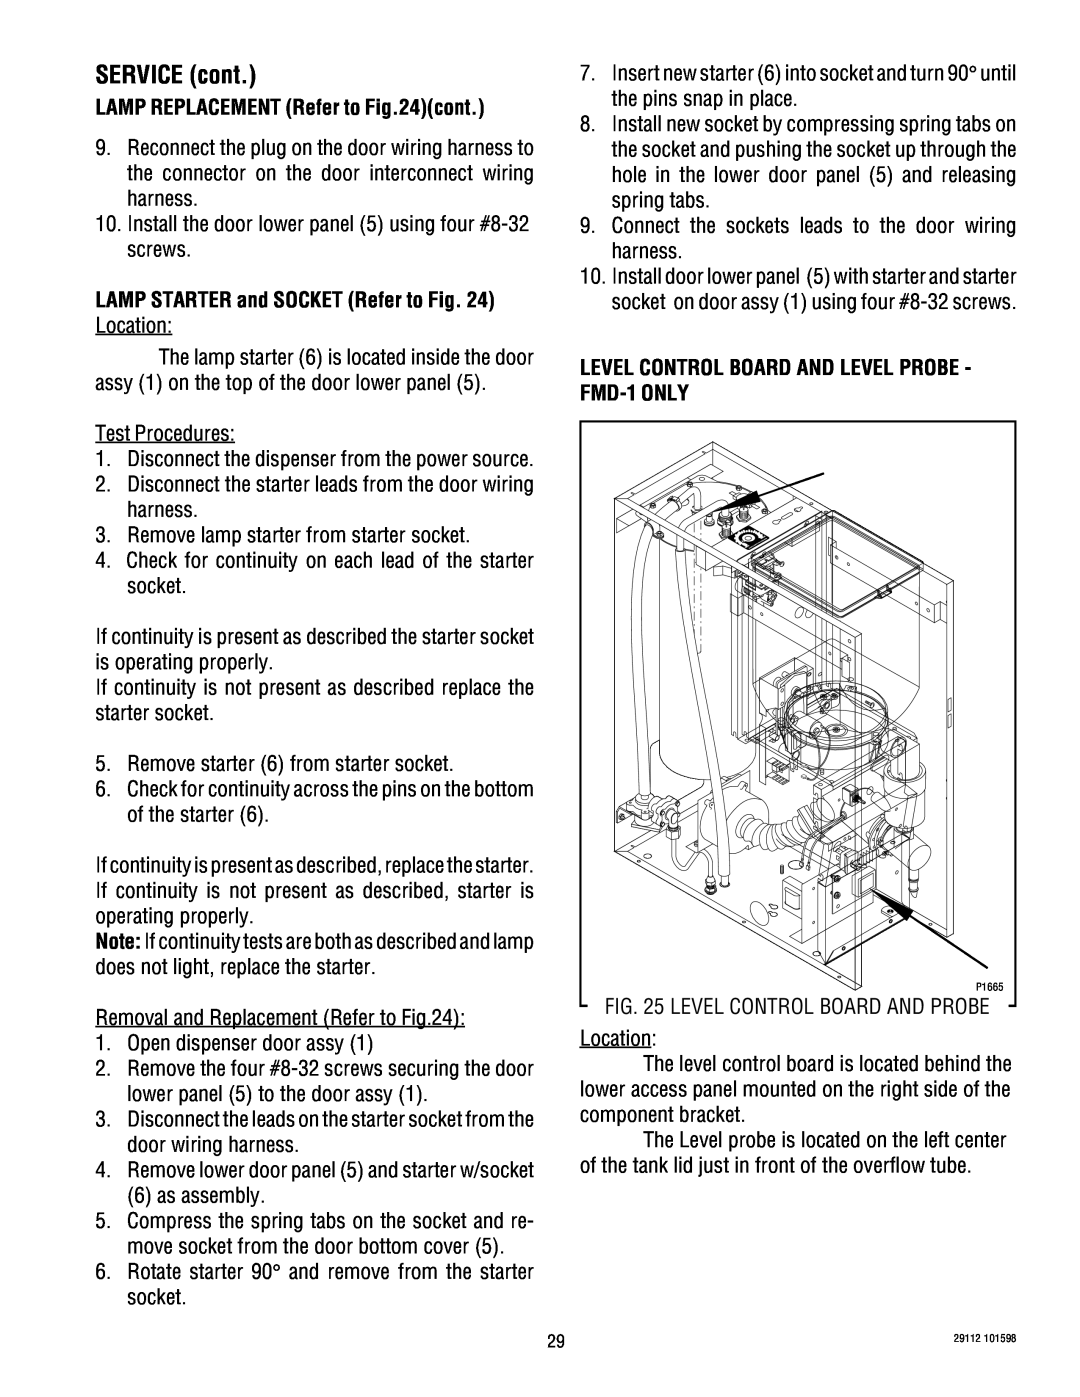 Bunn FMD-2, FMD-1 service manual LAMP REPLACEMENT Refer to cont, LAMP STARTER and SOCKET Refer to Location, SERVICE cont 